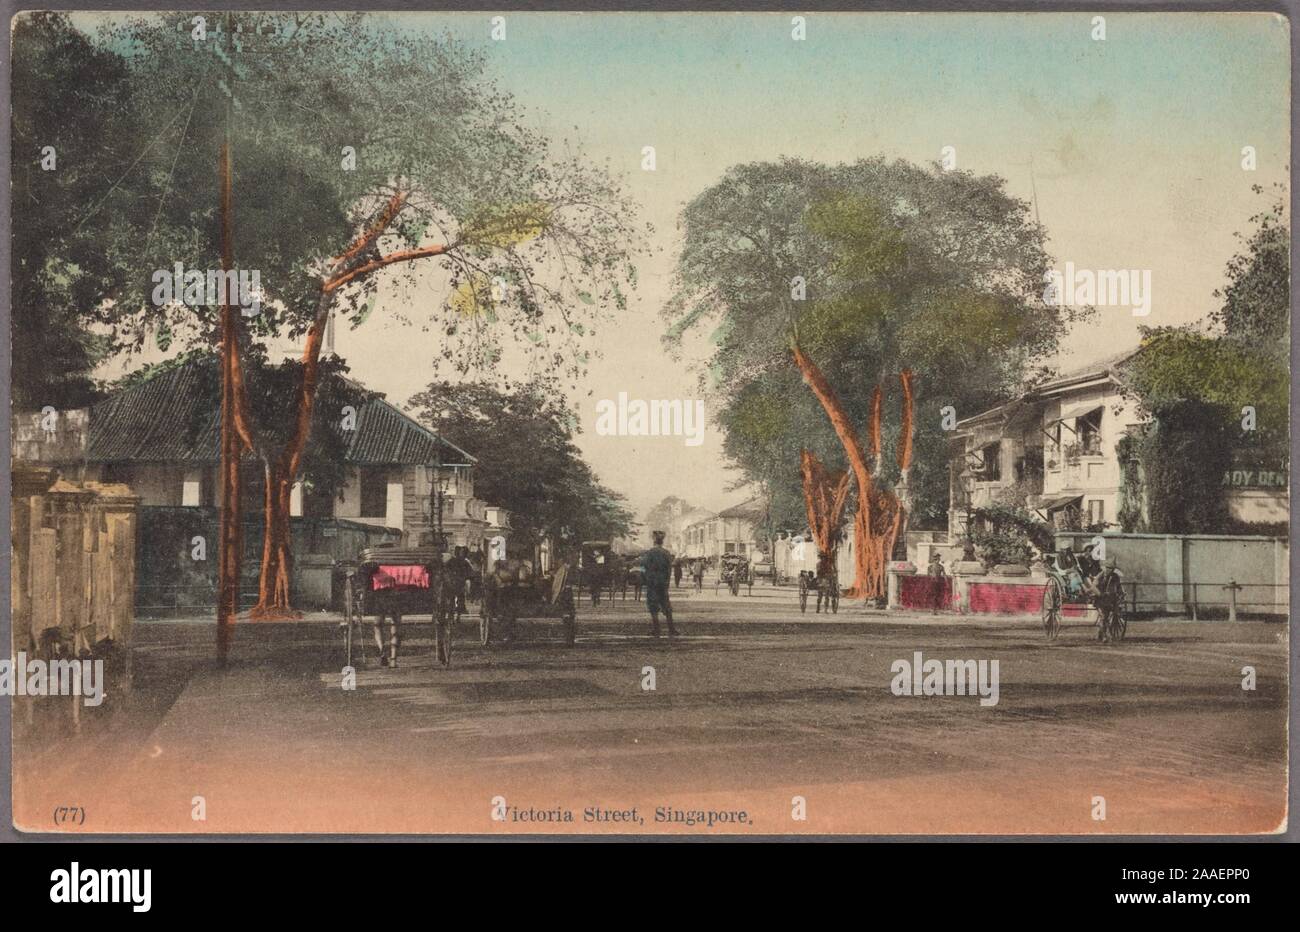 Illustrated postcard of houses lining the residential Victoria Street, which passes through the districts of Kampong Glam, Bugis and Bras Basah, Singapore, 1912. From the New York Public Library. () Stock Photo